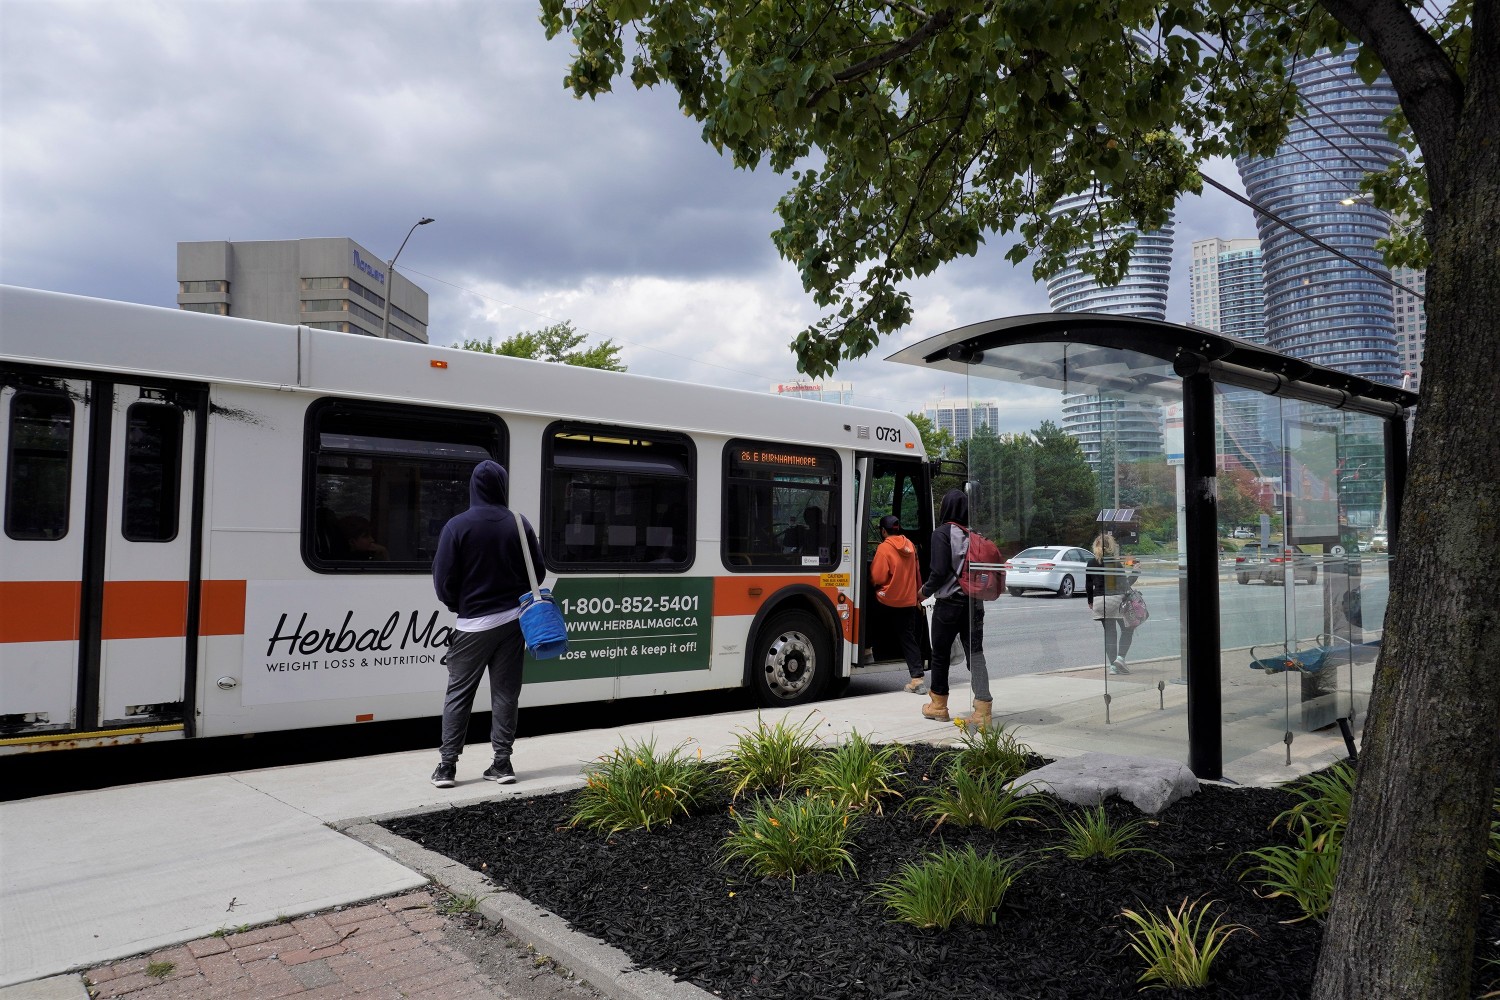 City of Mississauga moves closer to clean, green transit system, away from dirty diesel buses